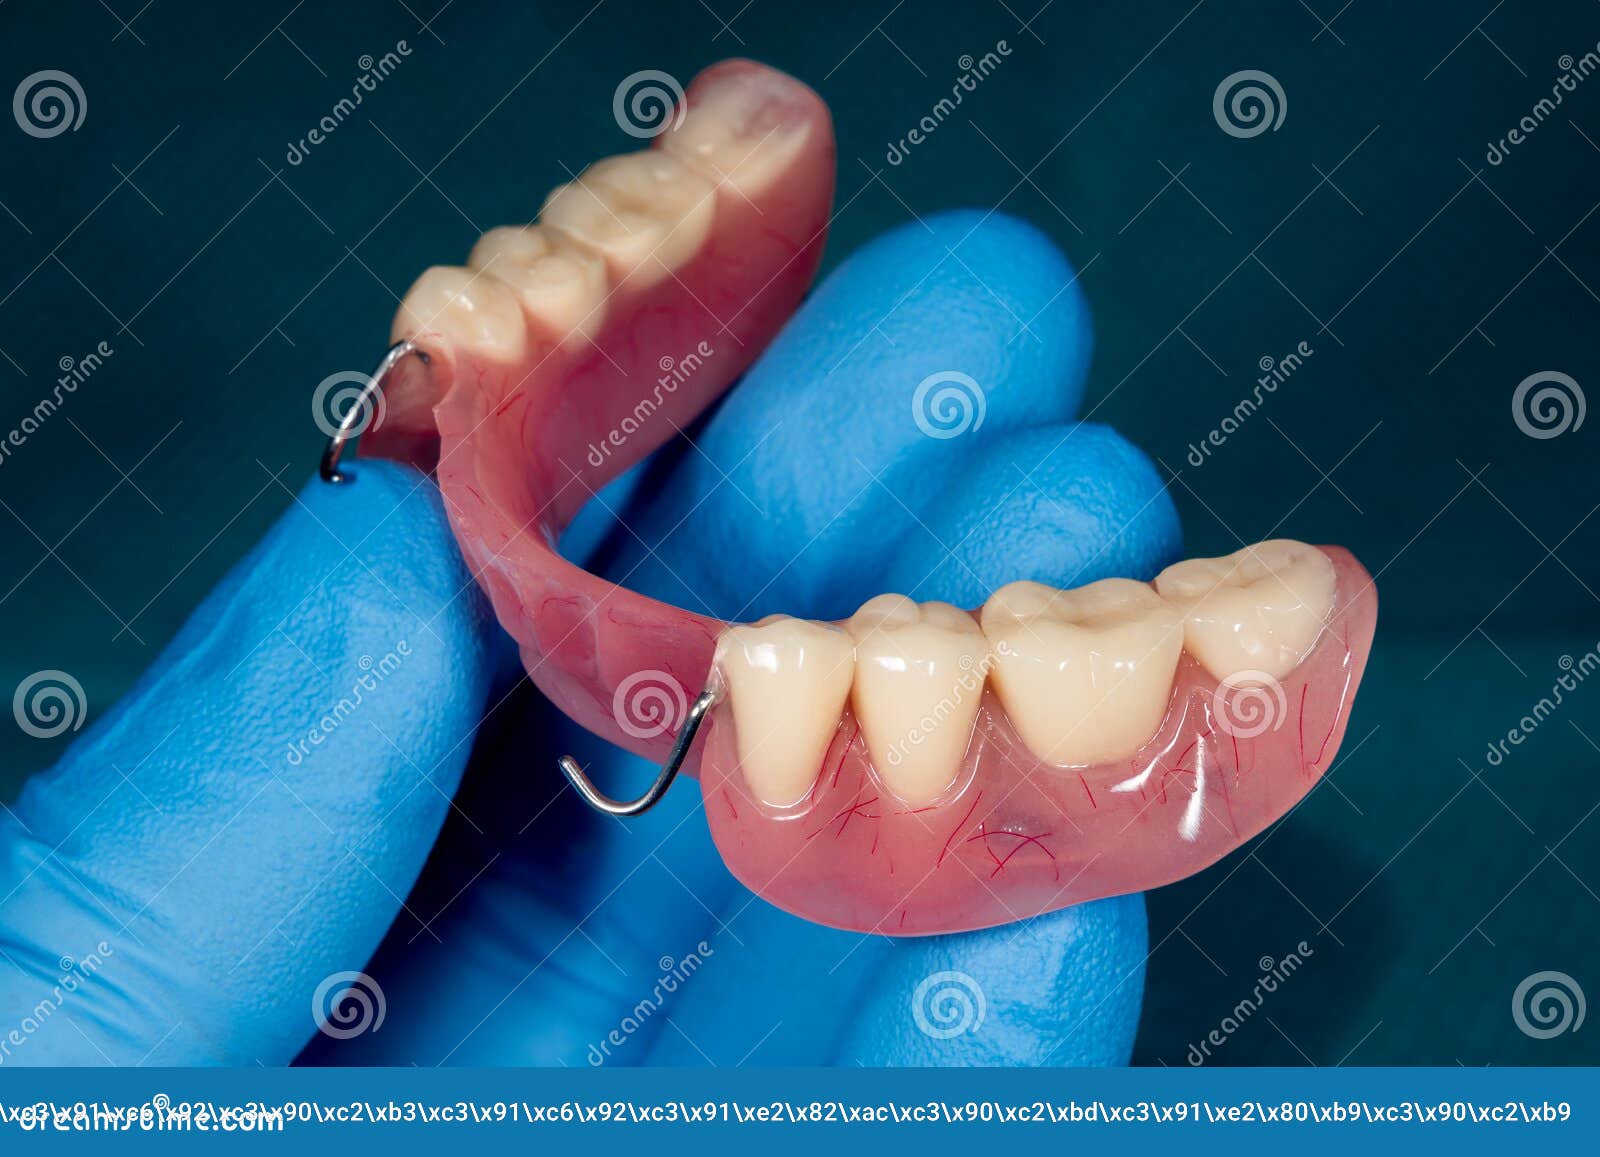 denture. partial removable denture of the lower jaw of a person with white beautiful teeth in the hand of a dentist. aesthetic